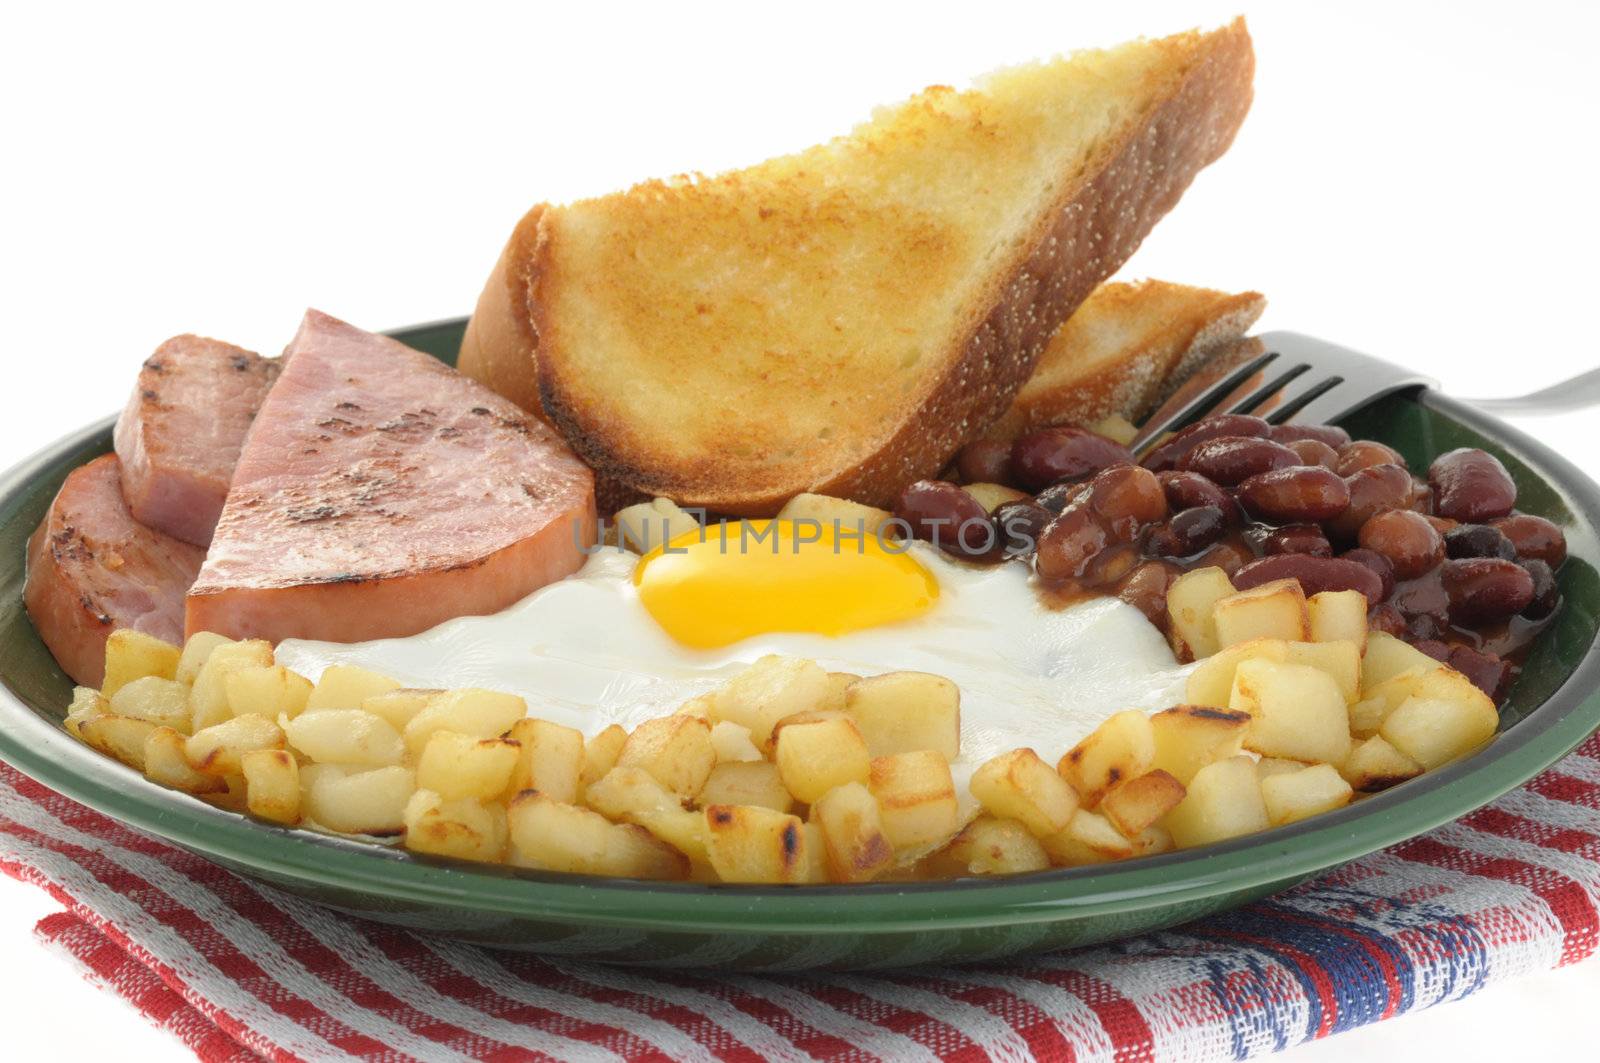 Delicious ham and egg breakfast with toast and beans.